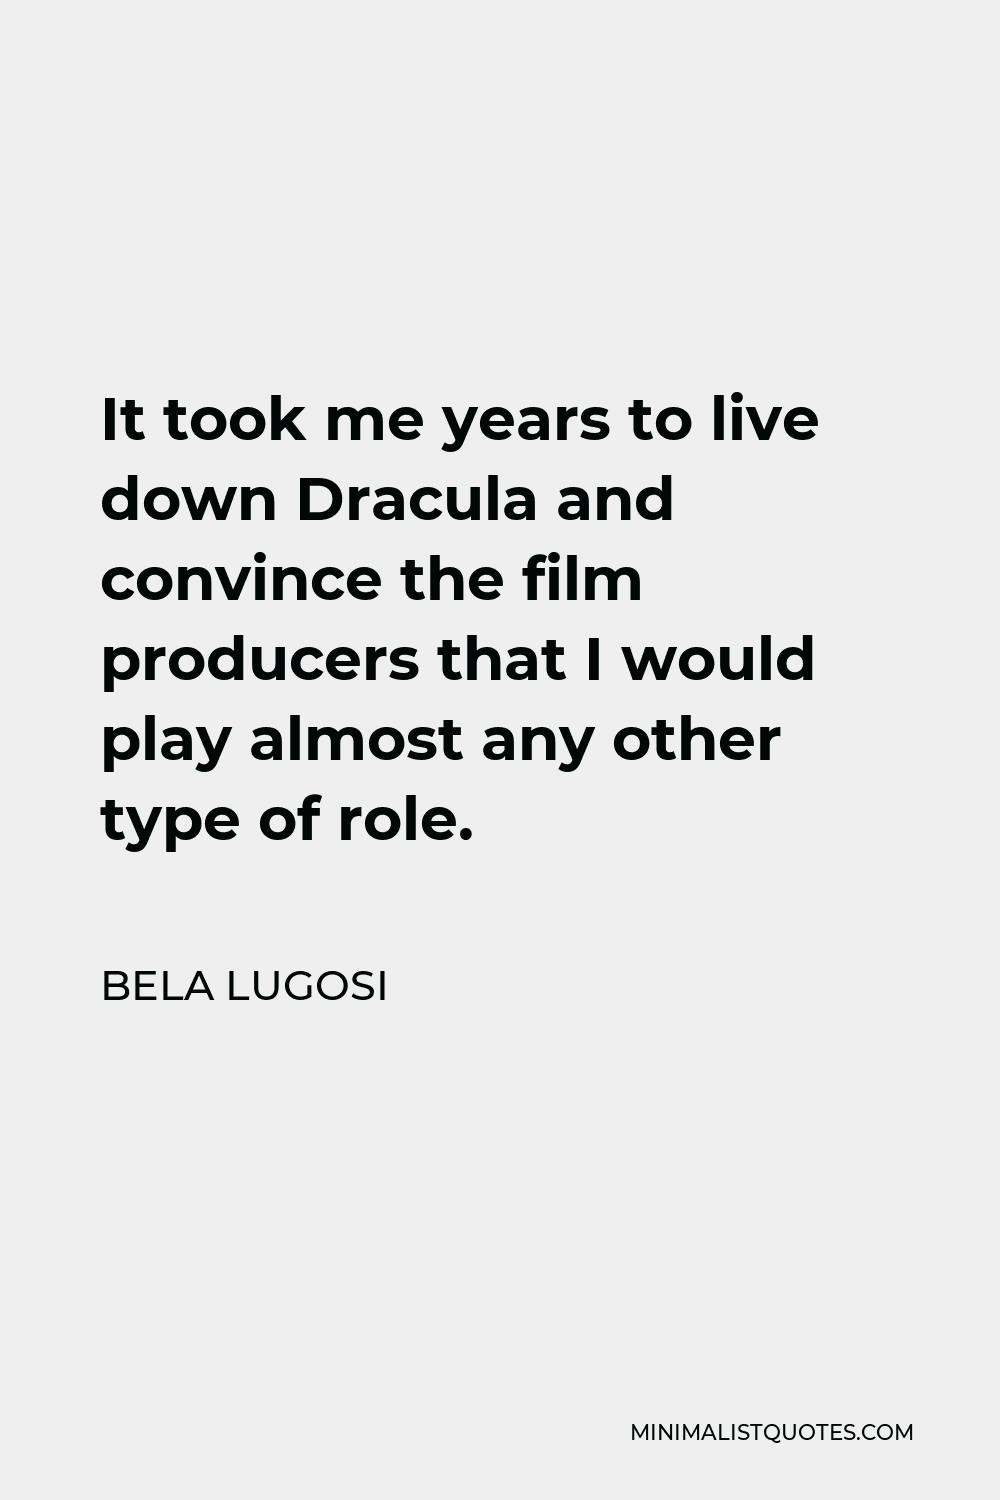 Bela Lugosi Quote - It took me years to live down Dracula and convince the film producers that I would play almost any other type of role.